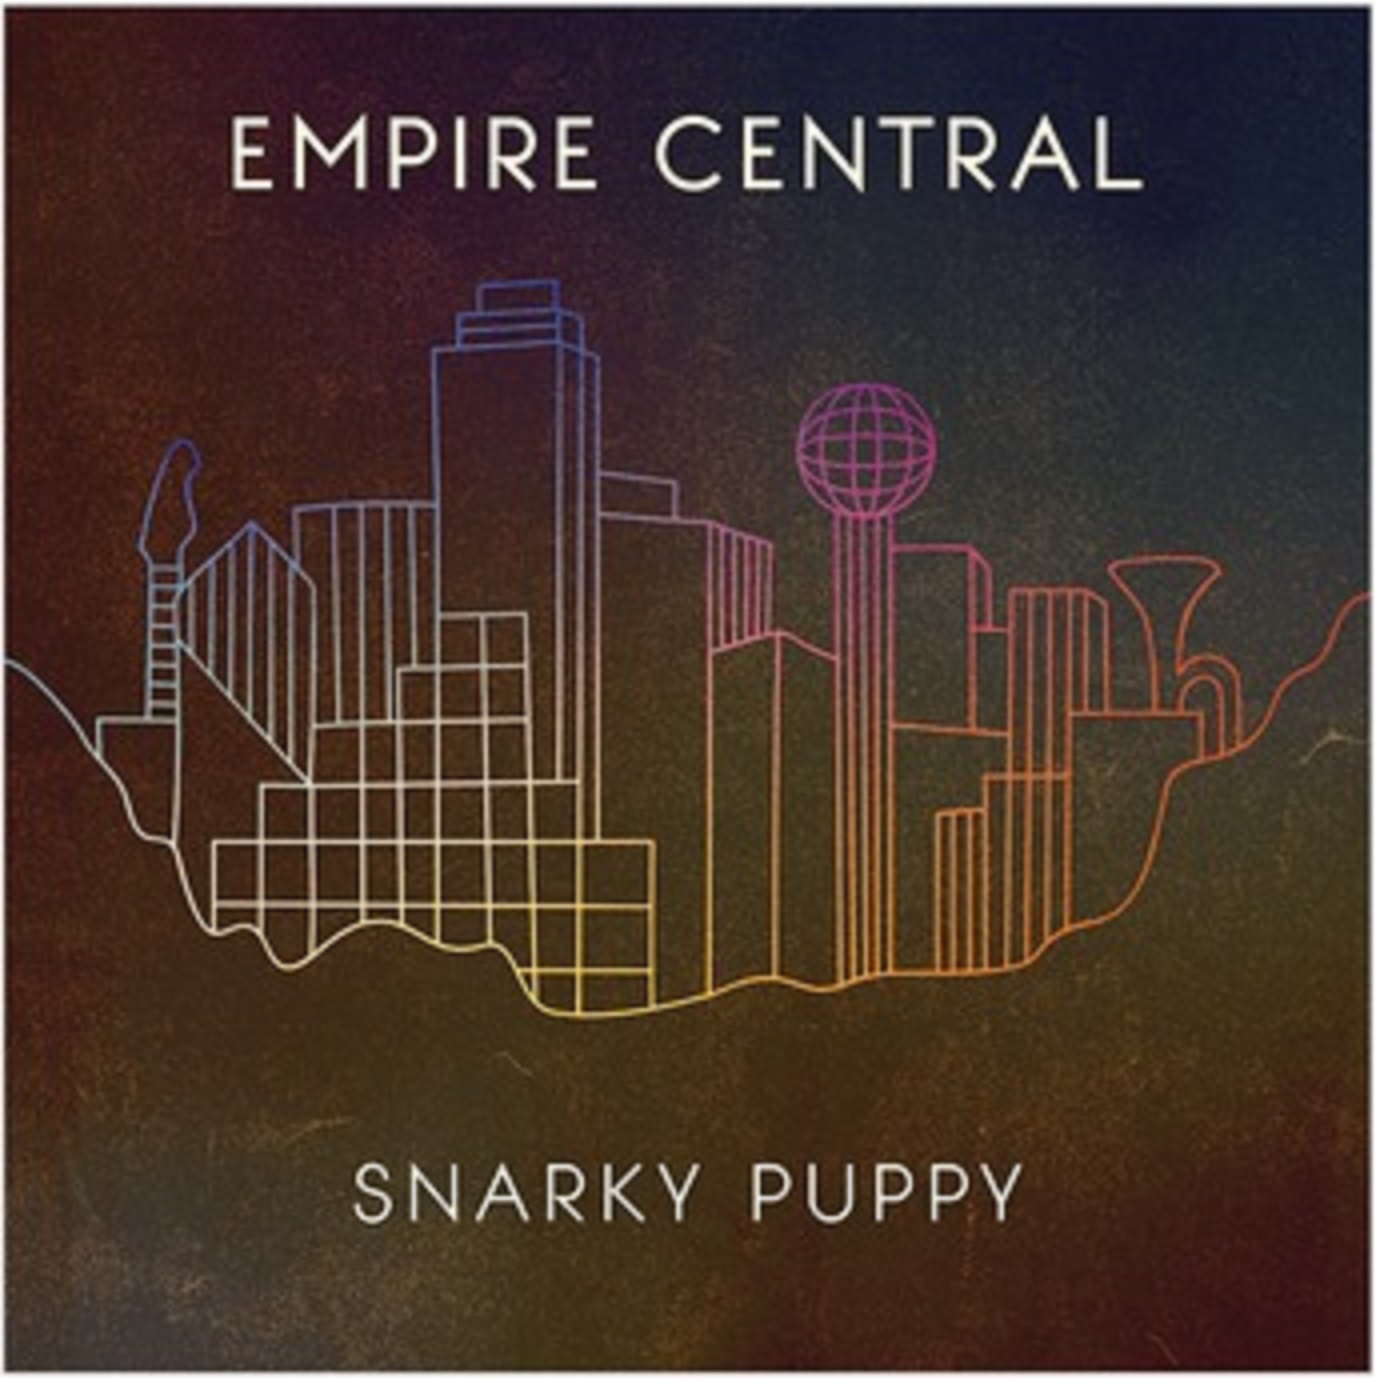 Snarky Puppy debuts new track "Bet" from forthcoming LP "Empire Central"